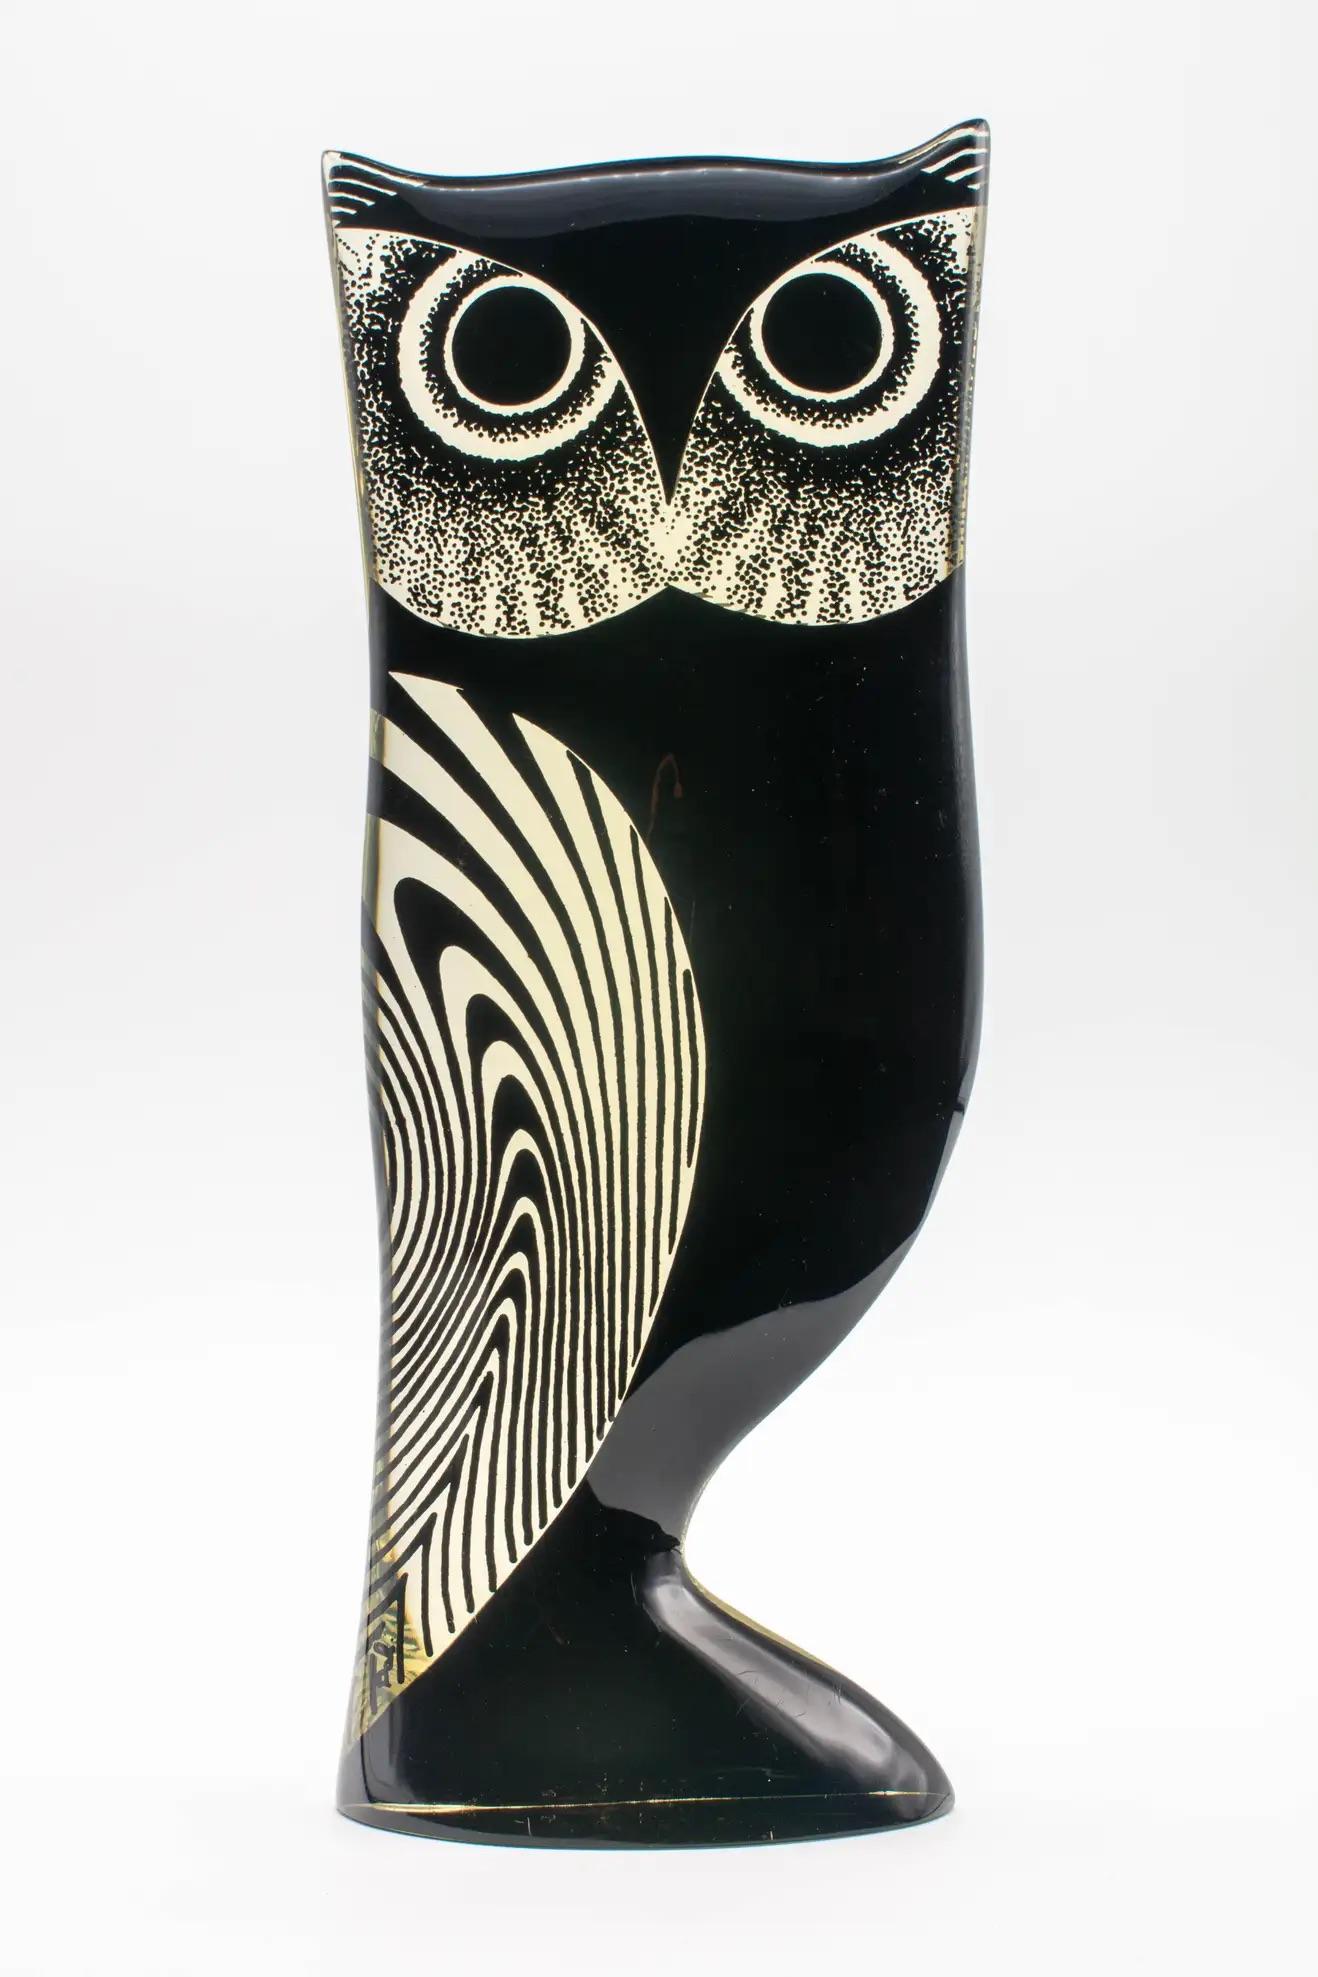 Abraham Palatnik,
Owl, Kinetic sculpture in acrylic resin. Brazil, c. 1970. Signed (19 x 8 x 3 cm)
This Polyester resin sculpture representing a bird, in the colors yellow and black 
It is part of the series of animal sculptures that Abraham